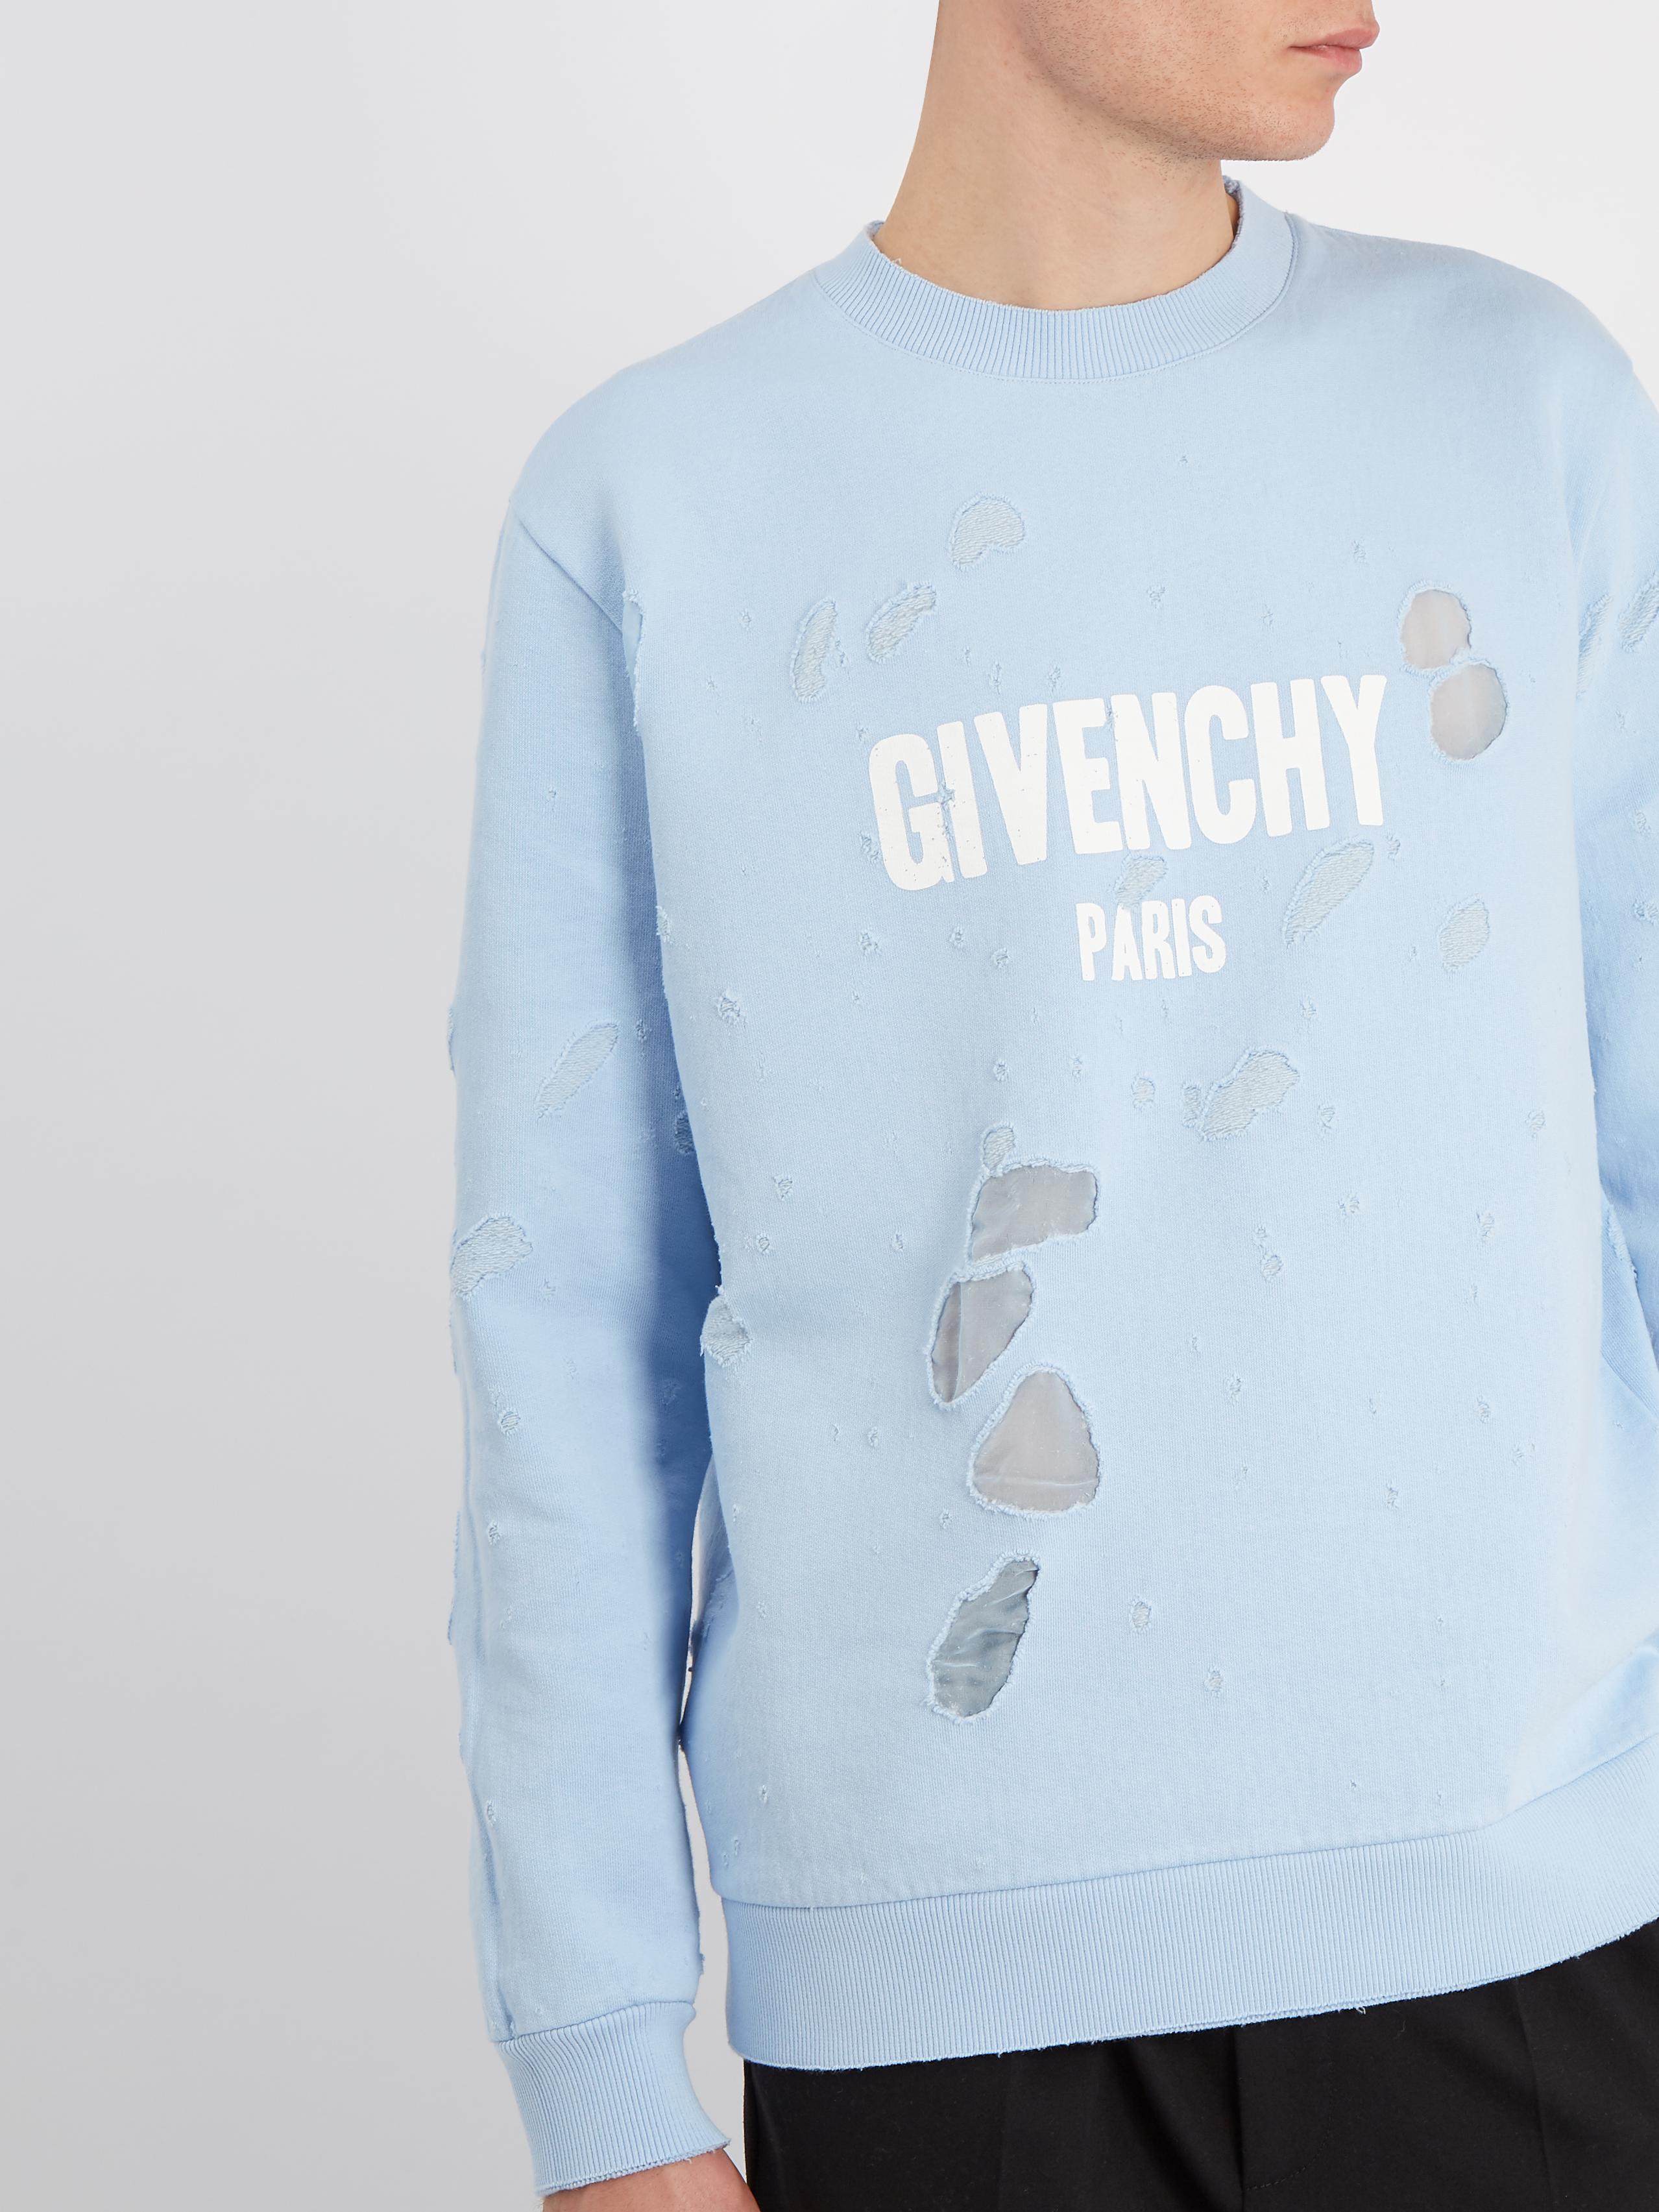 baby givenchy jumper